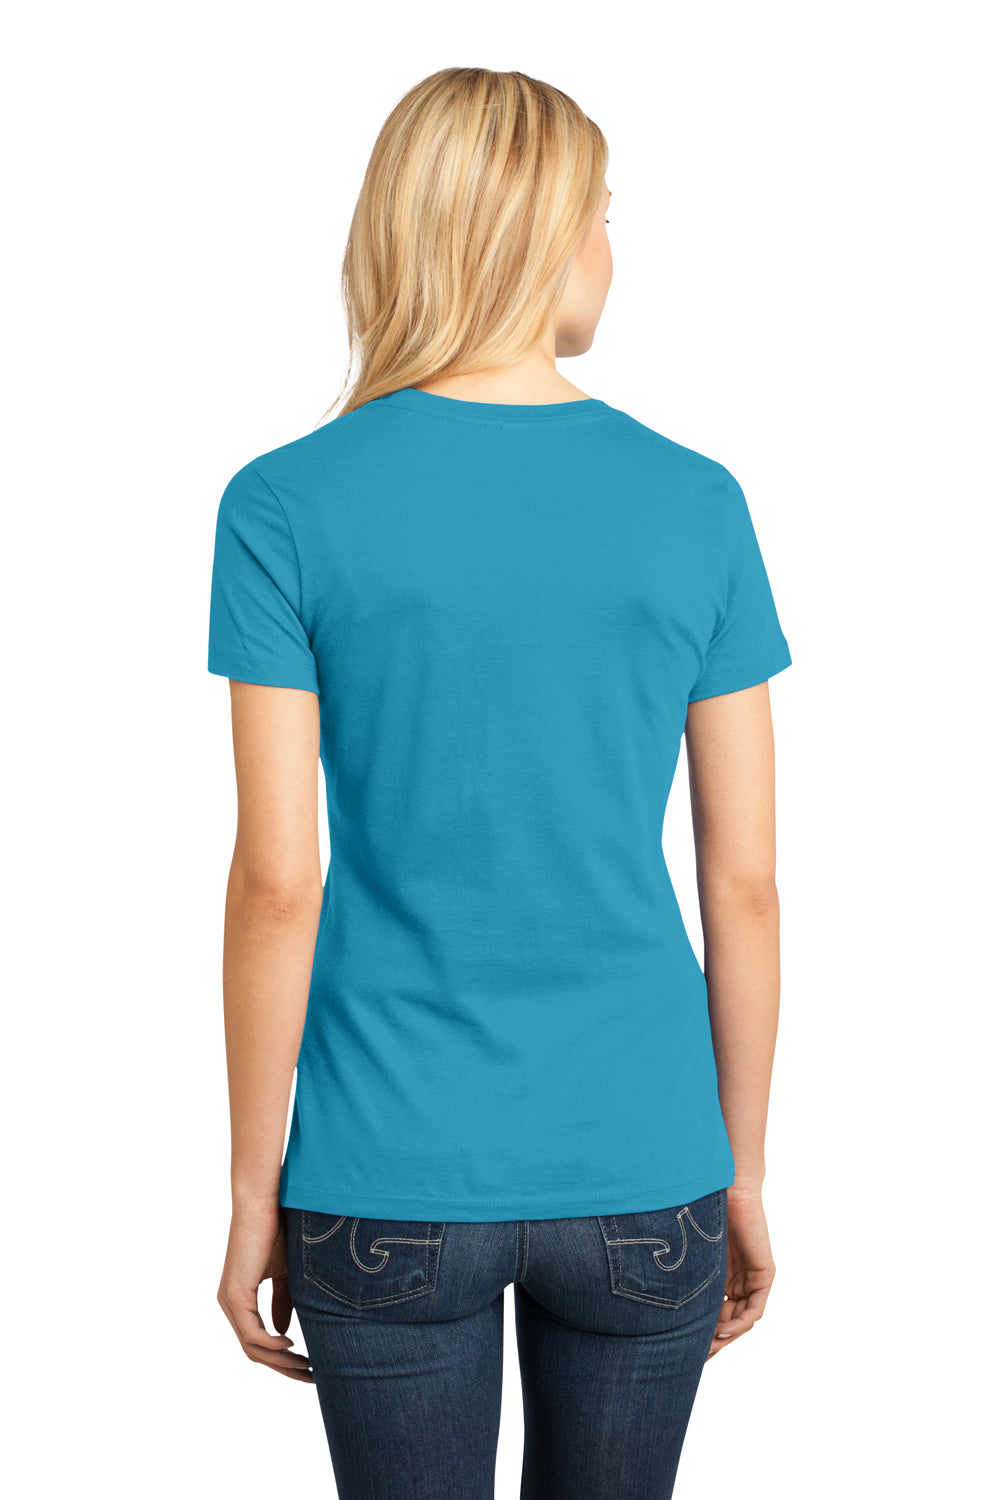 District DM104L Womens Perfect Weight Short Sleeve Crewneck T-Shirt Turquoise Blue Back